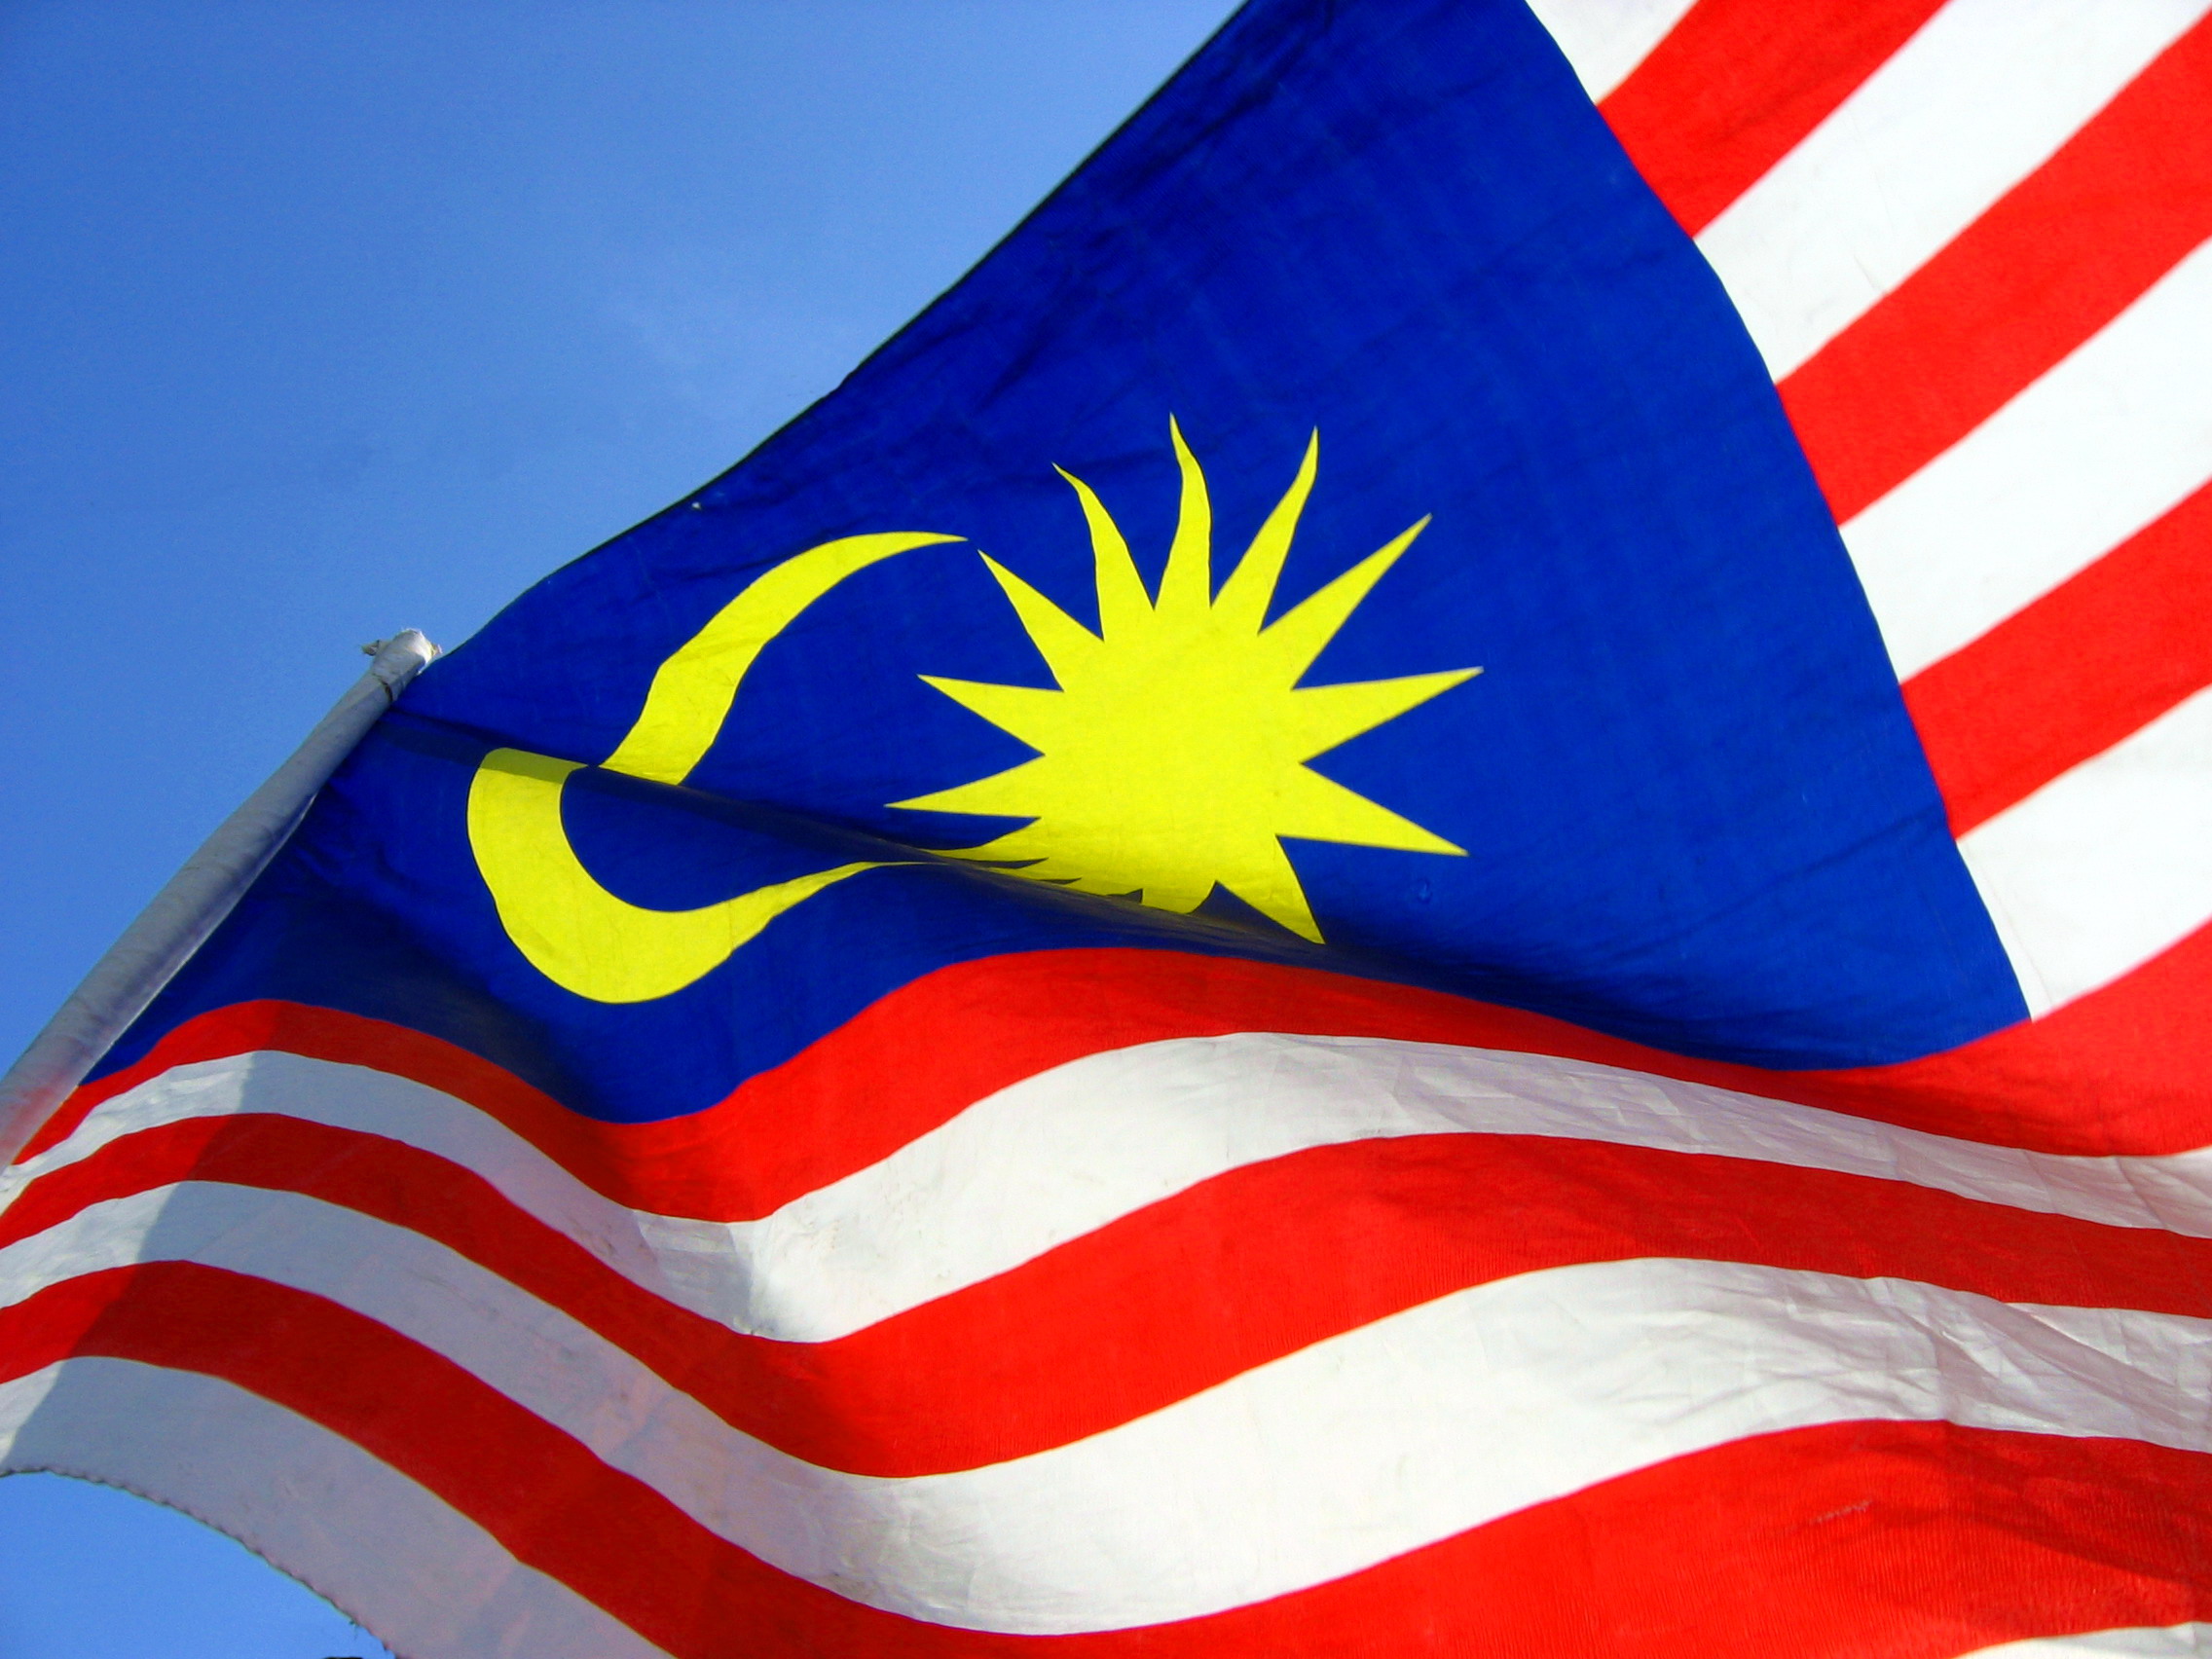 Malaysia's chief justice says constitutional amendment did not remove